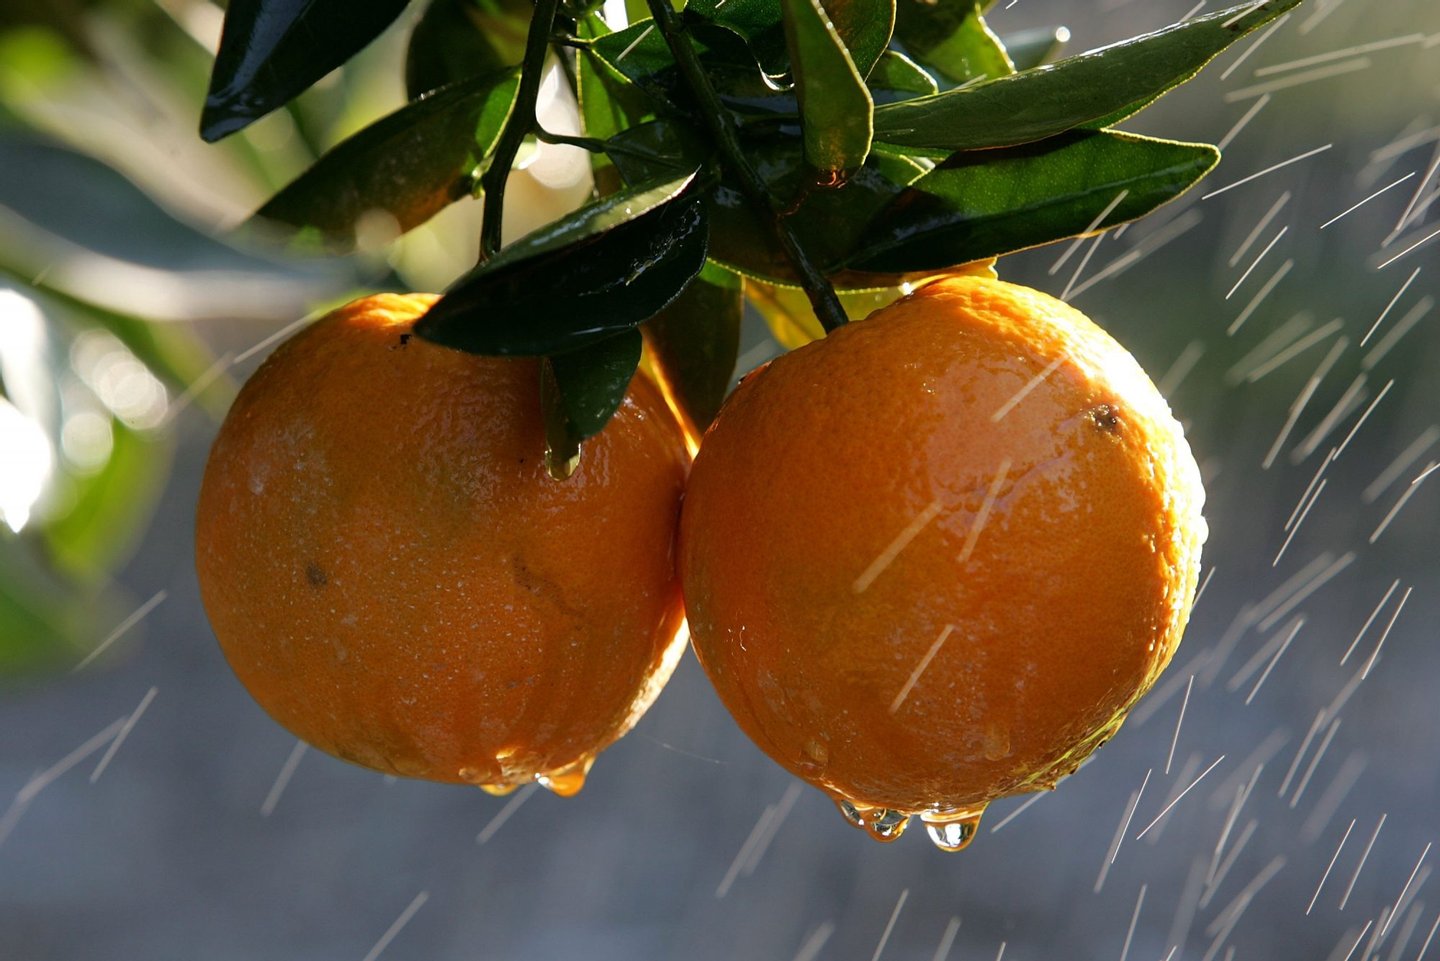 FRESNO, CA - JANUARY 16: Oranges are sprayed with water to melt the ice frozen over them at the Keith A. Nilmeier Farms January 16, 2007 in Fresno, California. An estimated 70% of California's citrus crops have been damaged by a severe cold snap that is bringing below freezing temperatures to California's central valley and is expected to continue through Sunday. (Photo by Justin Sullivan/Getty Images)